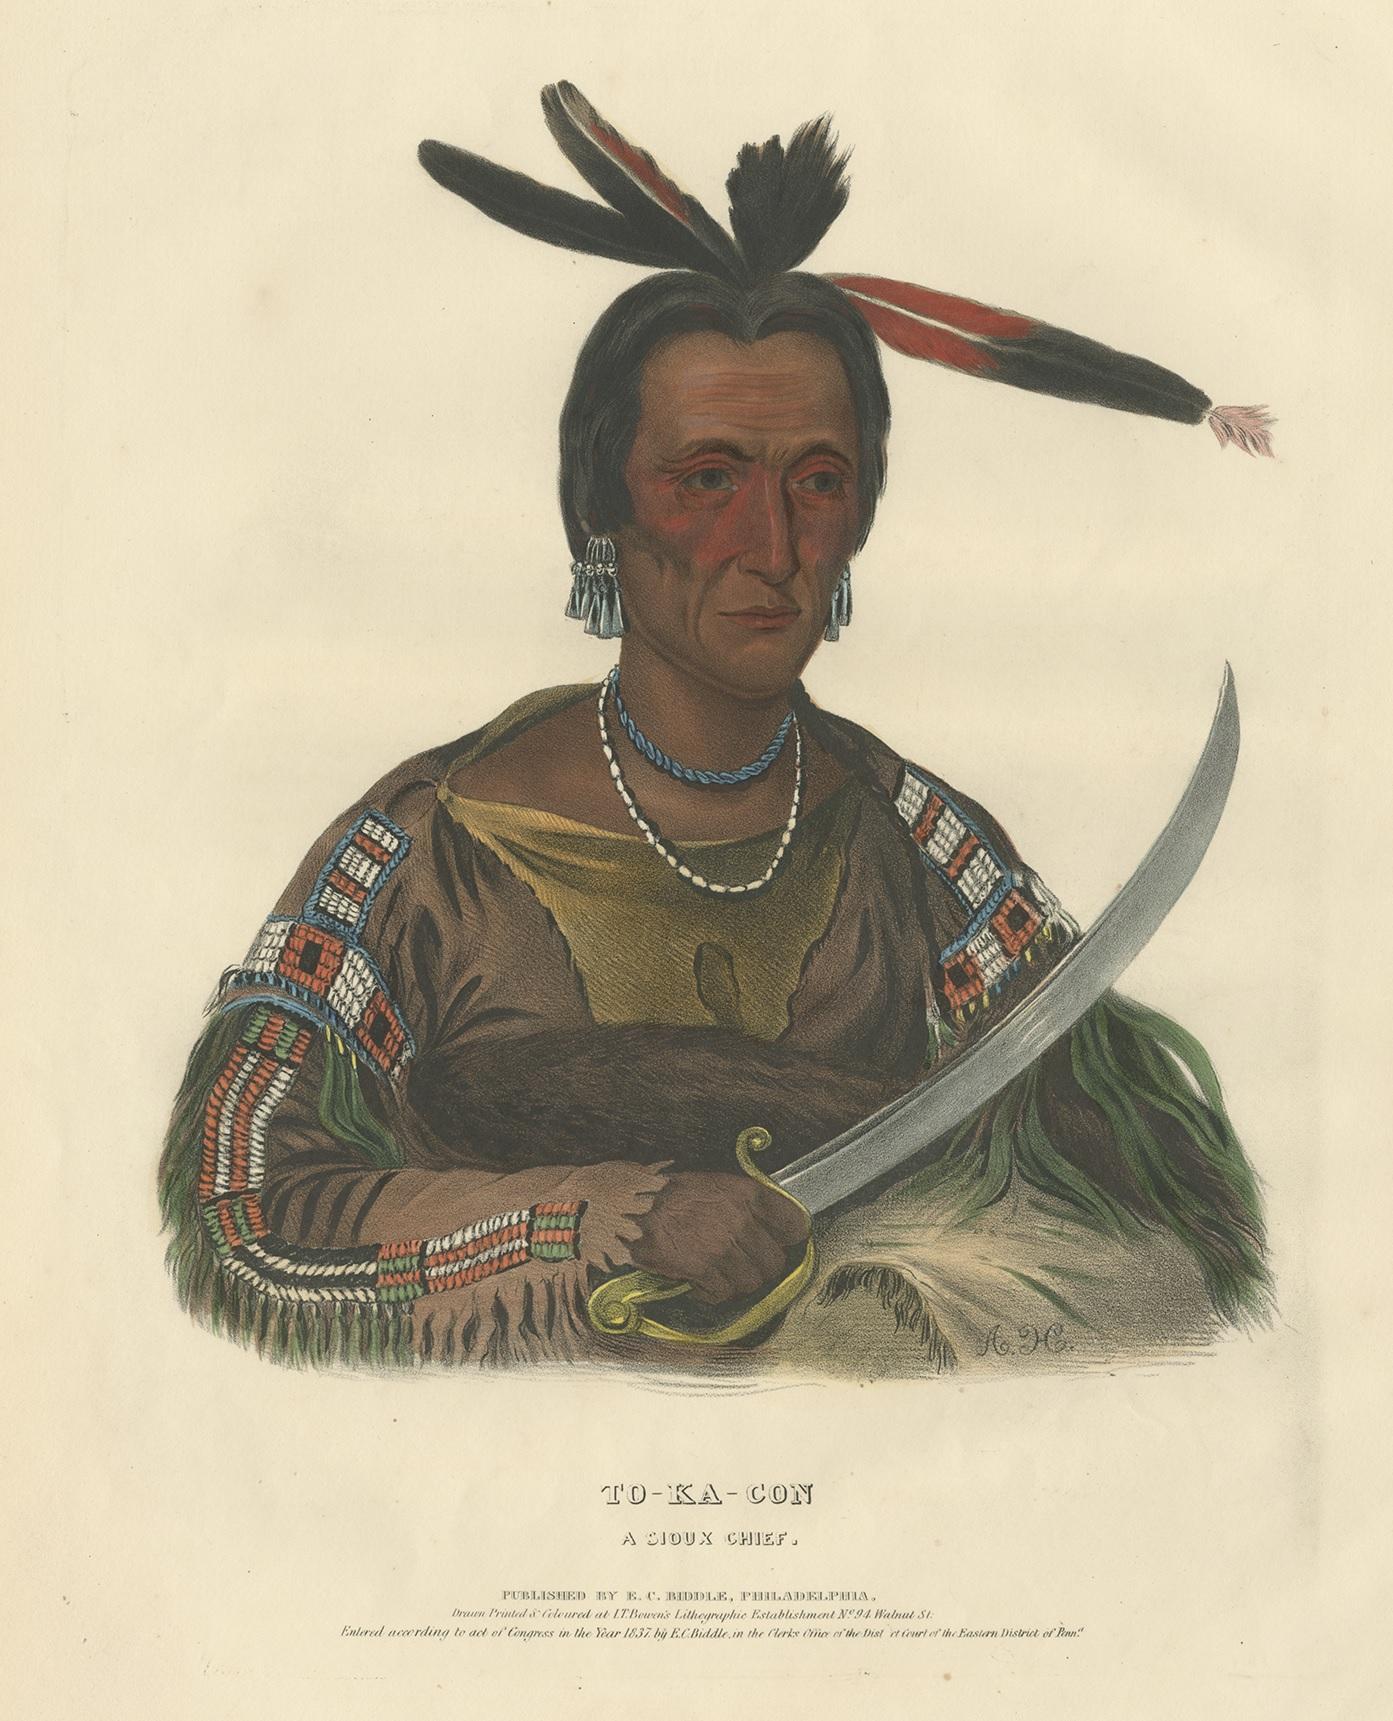 Antique print titled 'To-Ka-Con a Sioux Chief'. Large hand-colored lithograph of Tokacou, a Yankton Sioux warrior and a member of the tribal police force. This print originates from 'History of the Indian Tribes of North America' by Thomas L.